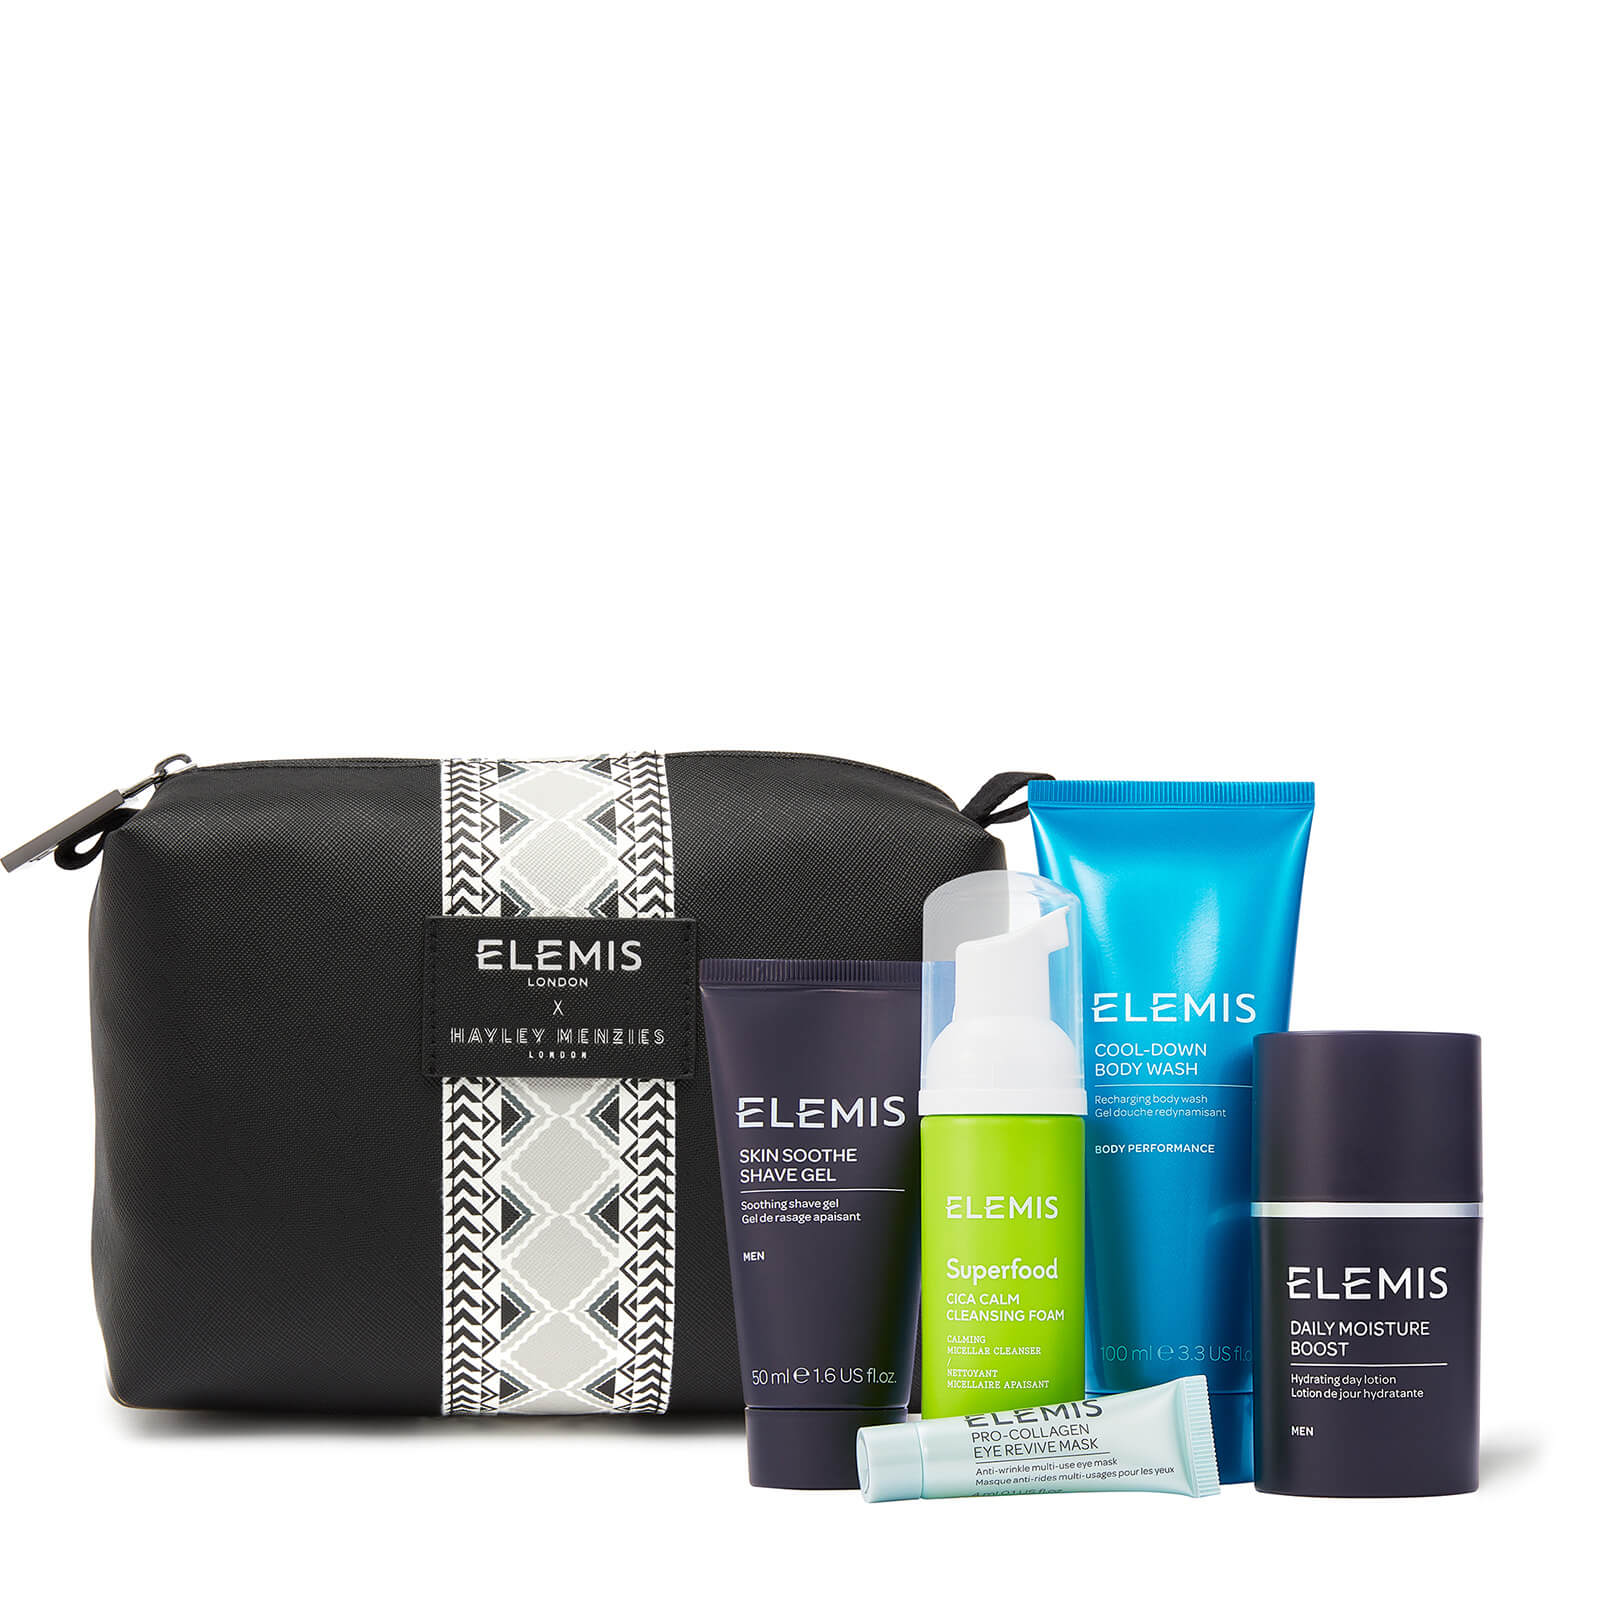 ELEMIS x Hayley Menzies London Grooming Collection (Worth £79.00)